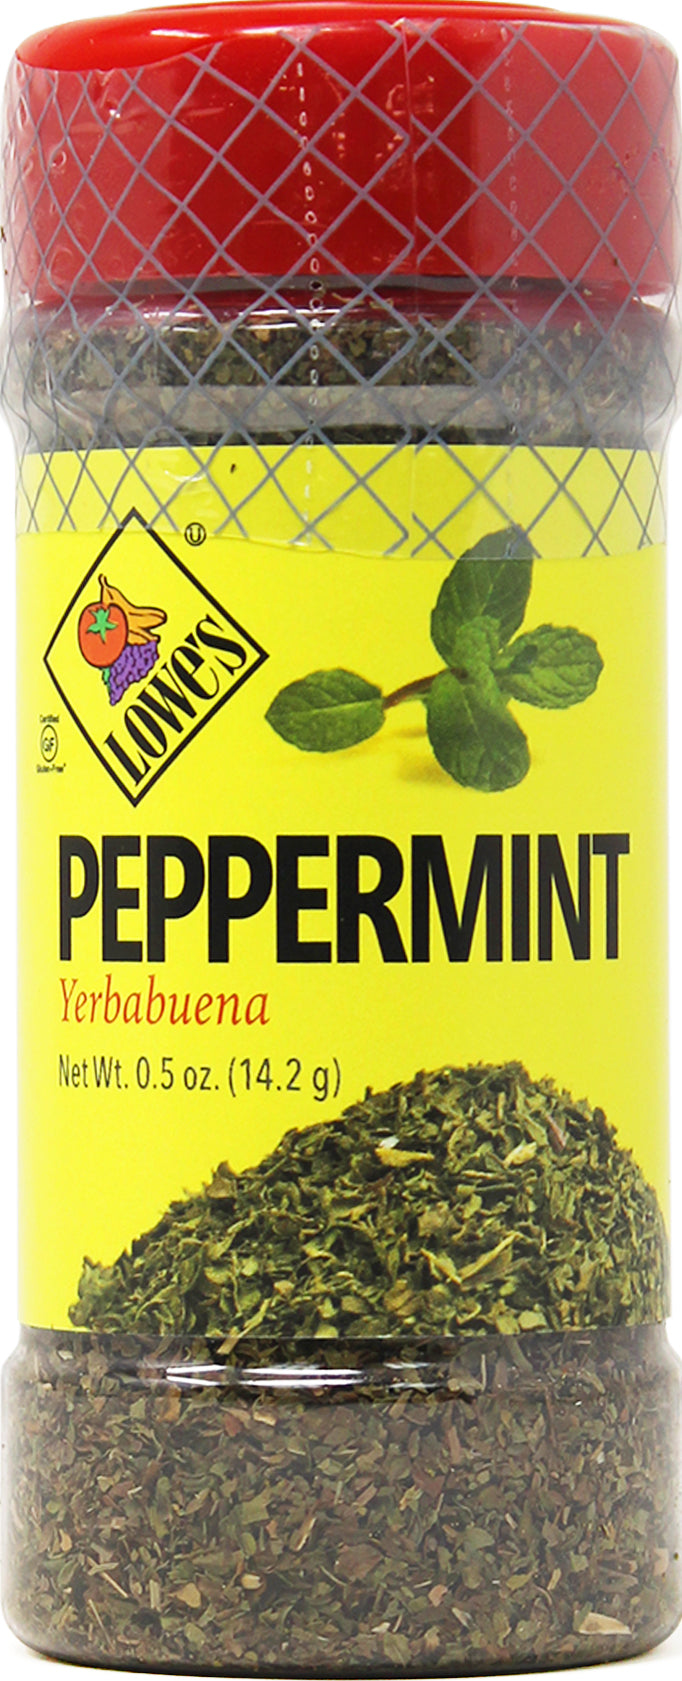 Lowes Peppermint 12/0.5 Oz.